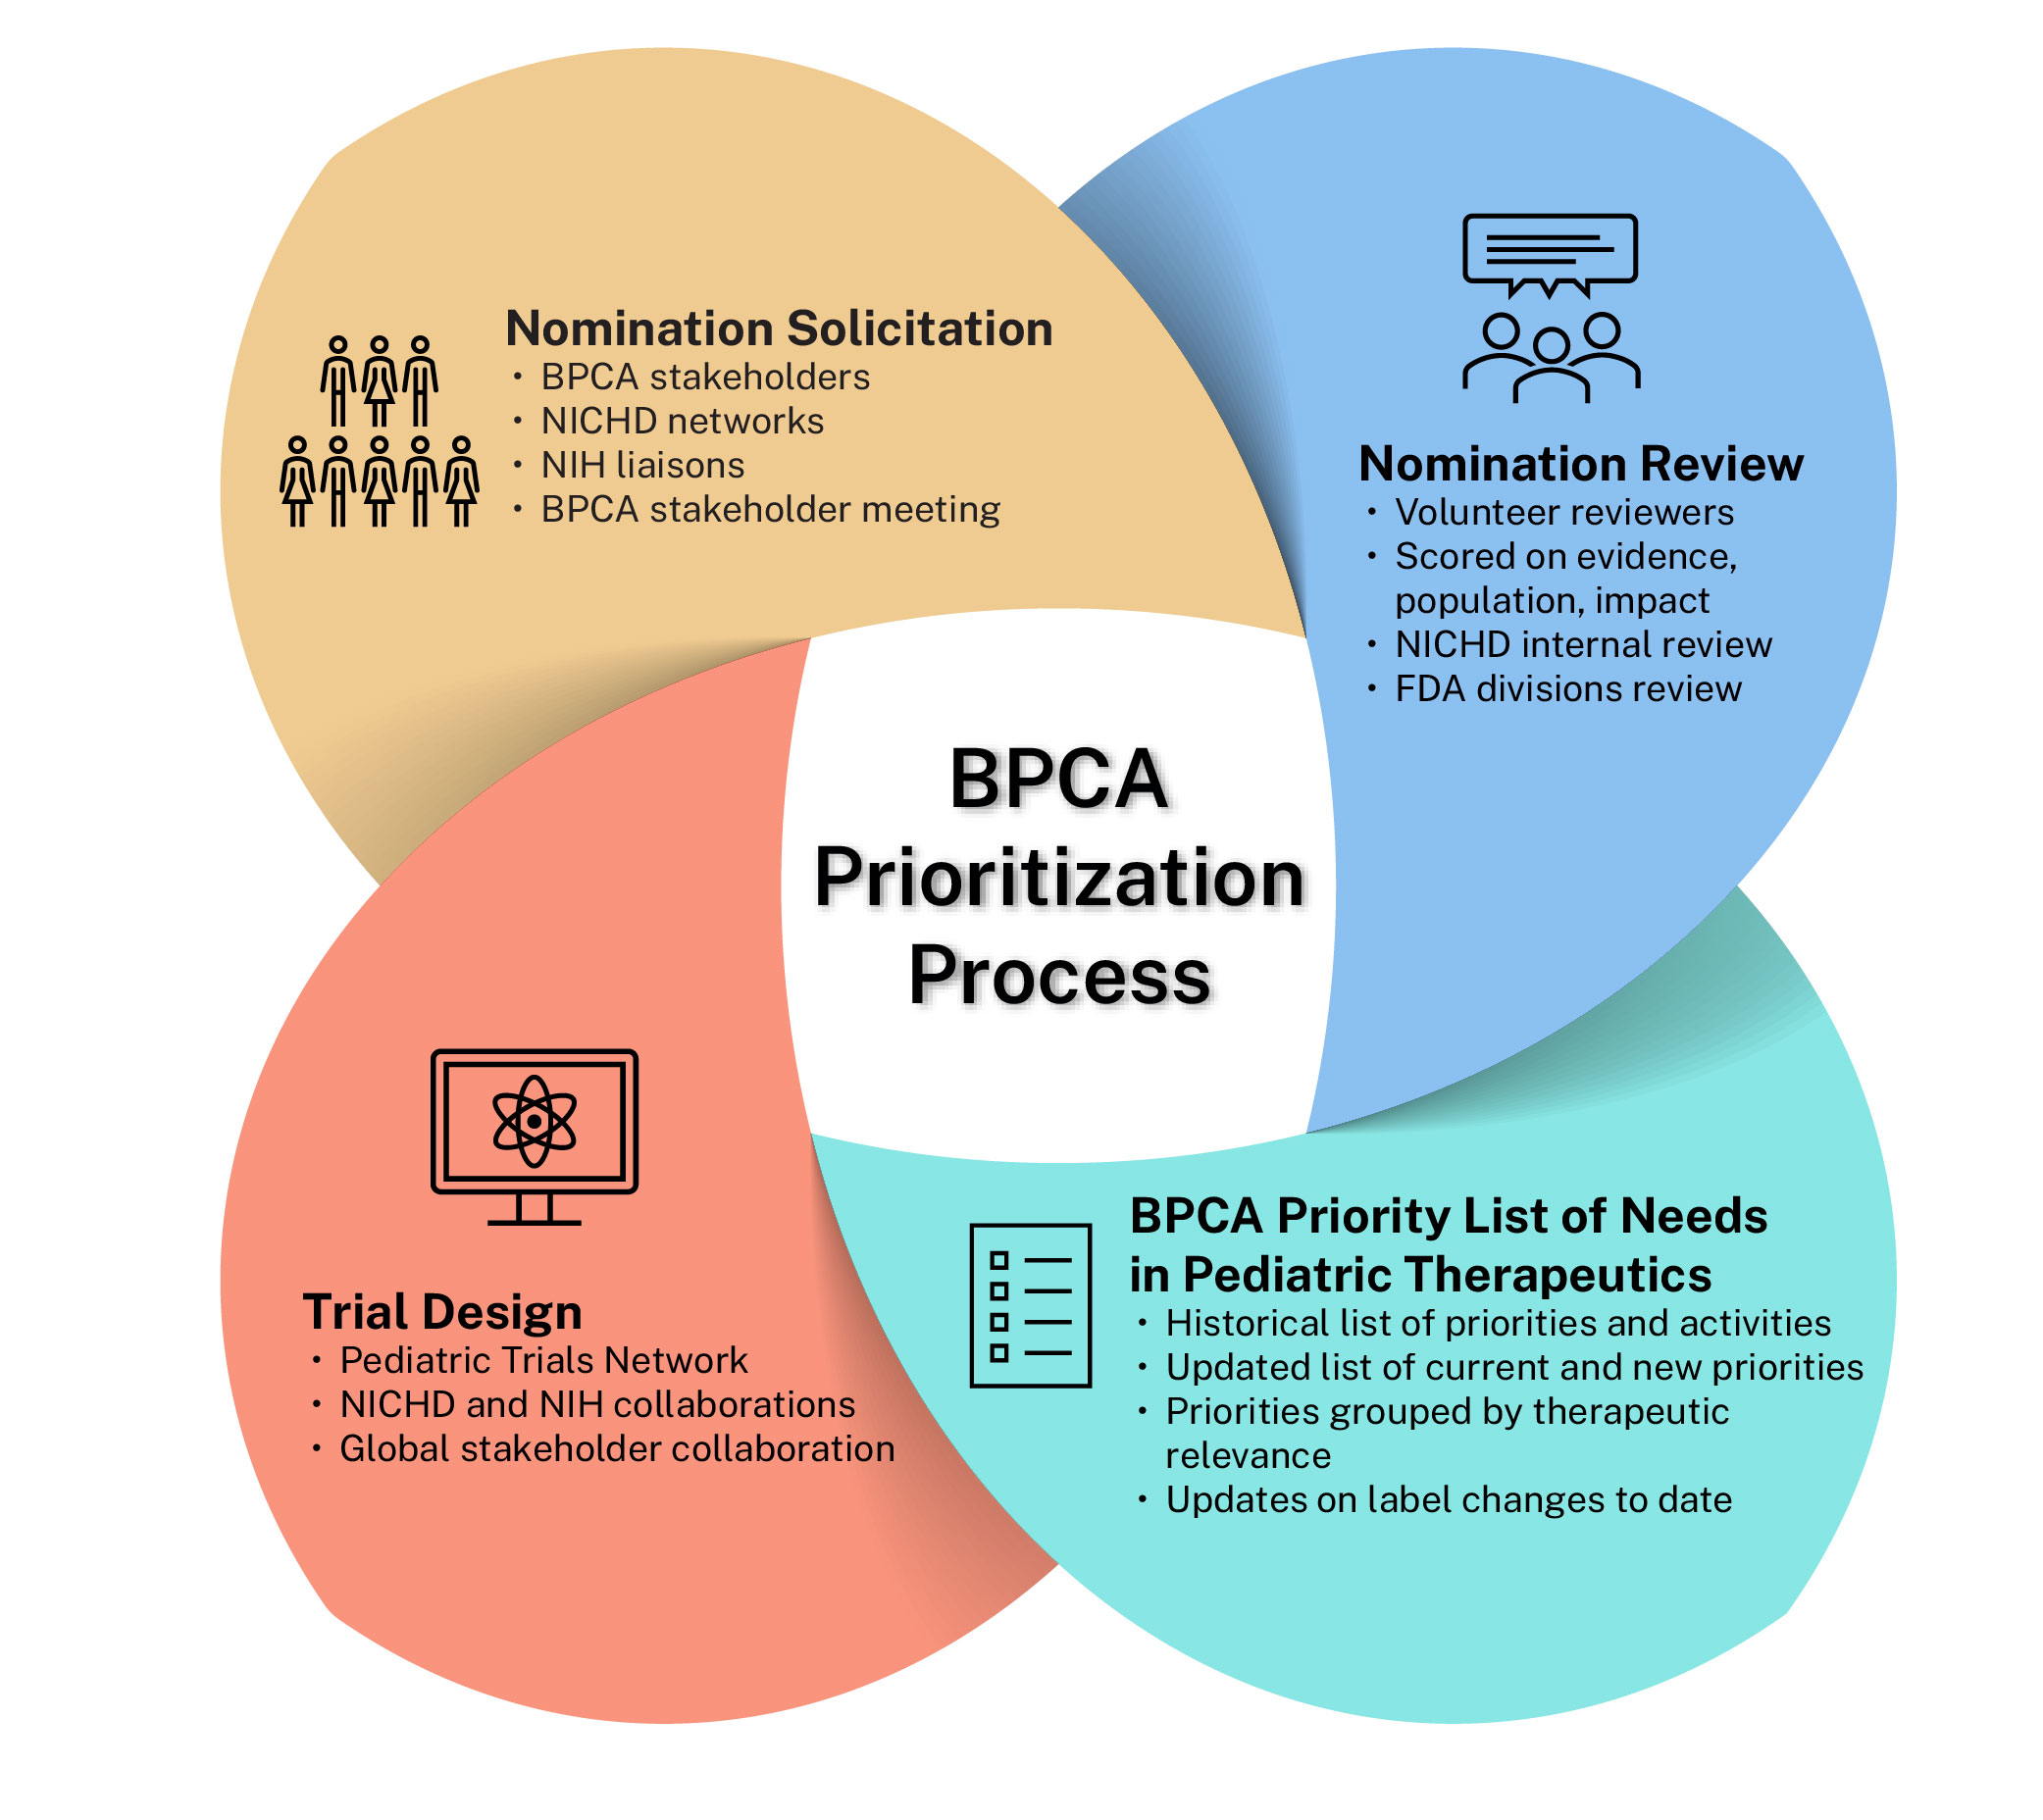 The BPCA prioritization process begins with the nomination solicitation, sent to BPCA stakeholders, NICHD networks, NIH liaisons, and the BPCA stakeholder meeting participants. Next, volunteer reviewers start the nomination review, which is scored on evidence, population, and impact. This step consists of both an NICHD internal review and FDA divisions review. The third step in the process is the updating of the BPCA priority list of needs in pediatric therapeutics. This historical list of priorities and activities gets updated with current and new priorities, which are grouped by therapeutic relevance, as well as updates on label changes to date. Finally, the process ends with trial design, which involves the  Pediatric Trials Network, NICHD and NIH collaborations, and global stakeholder collaboration.